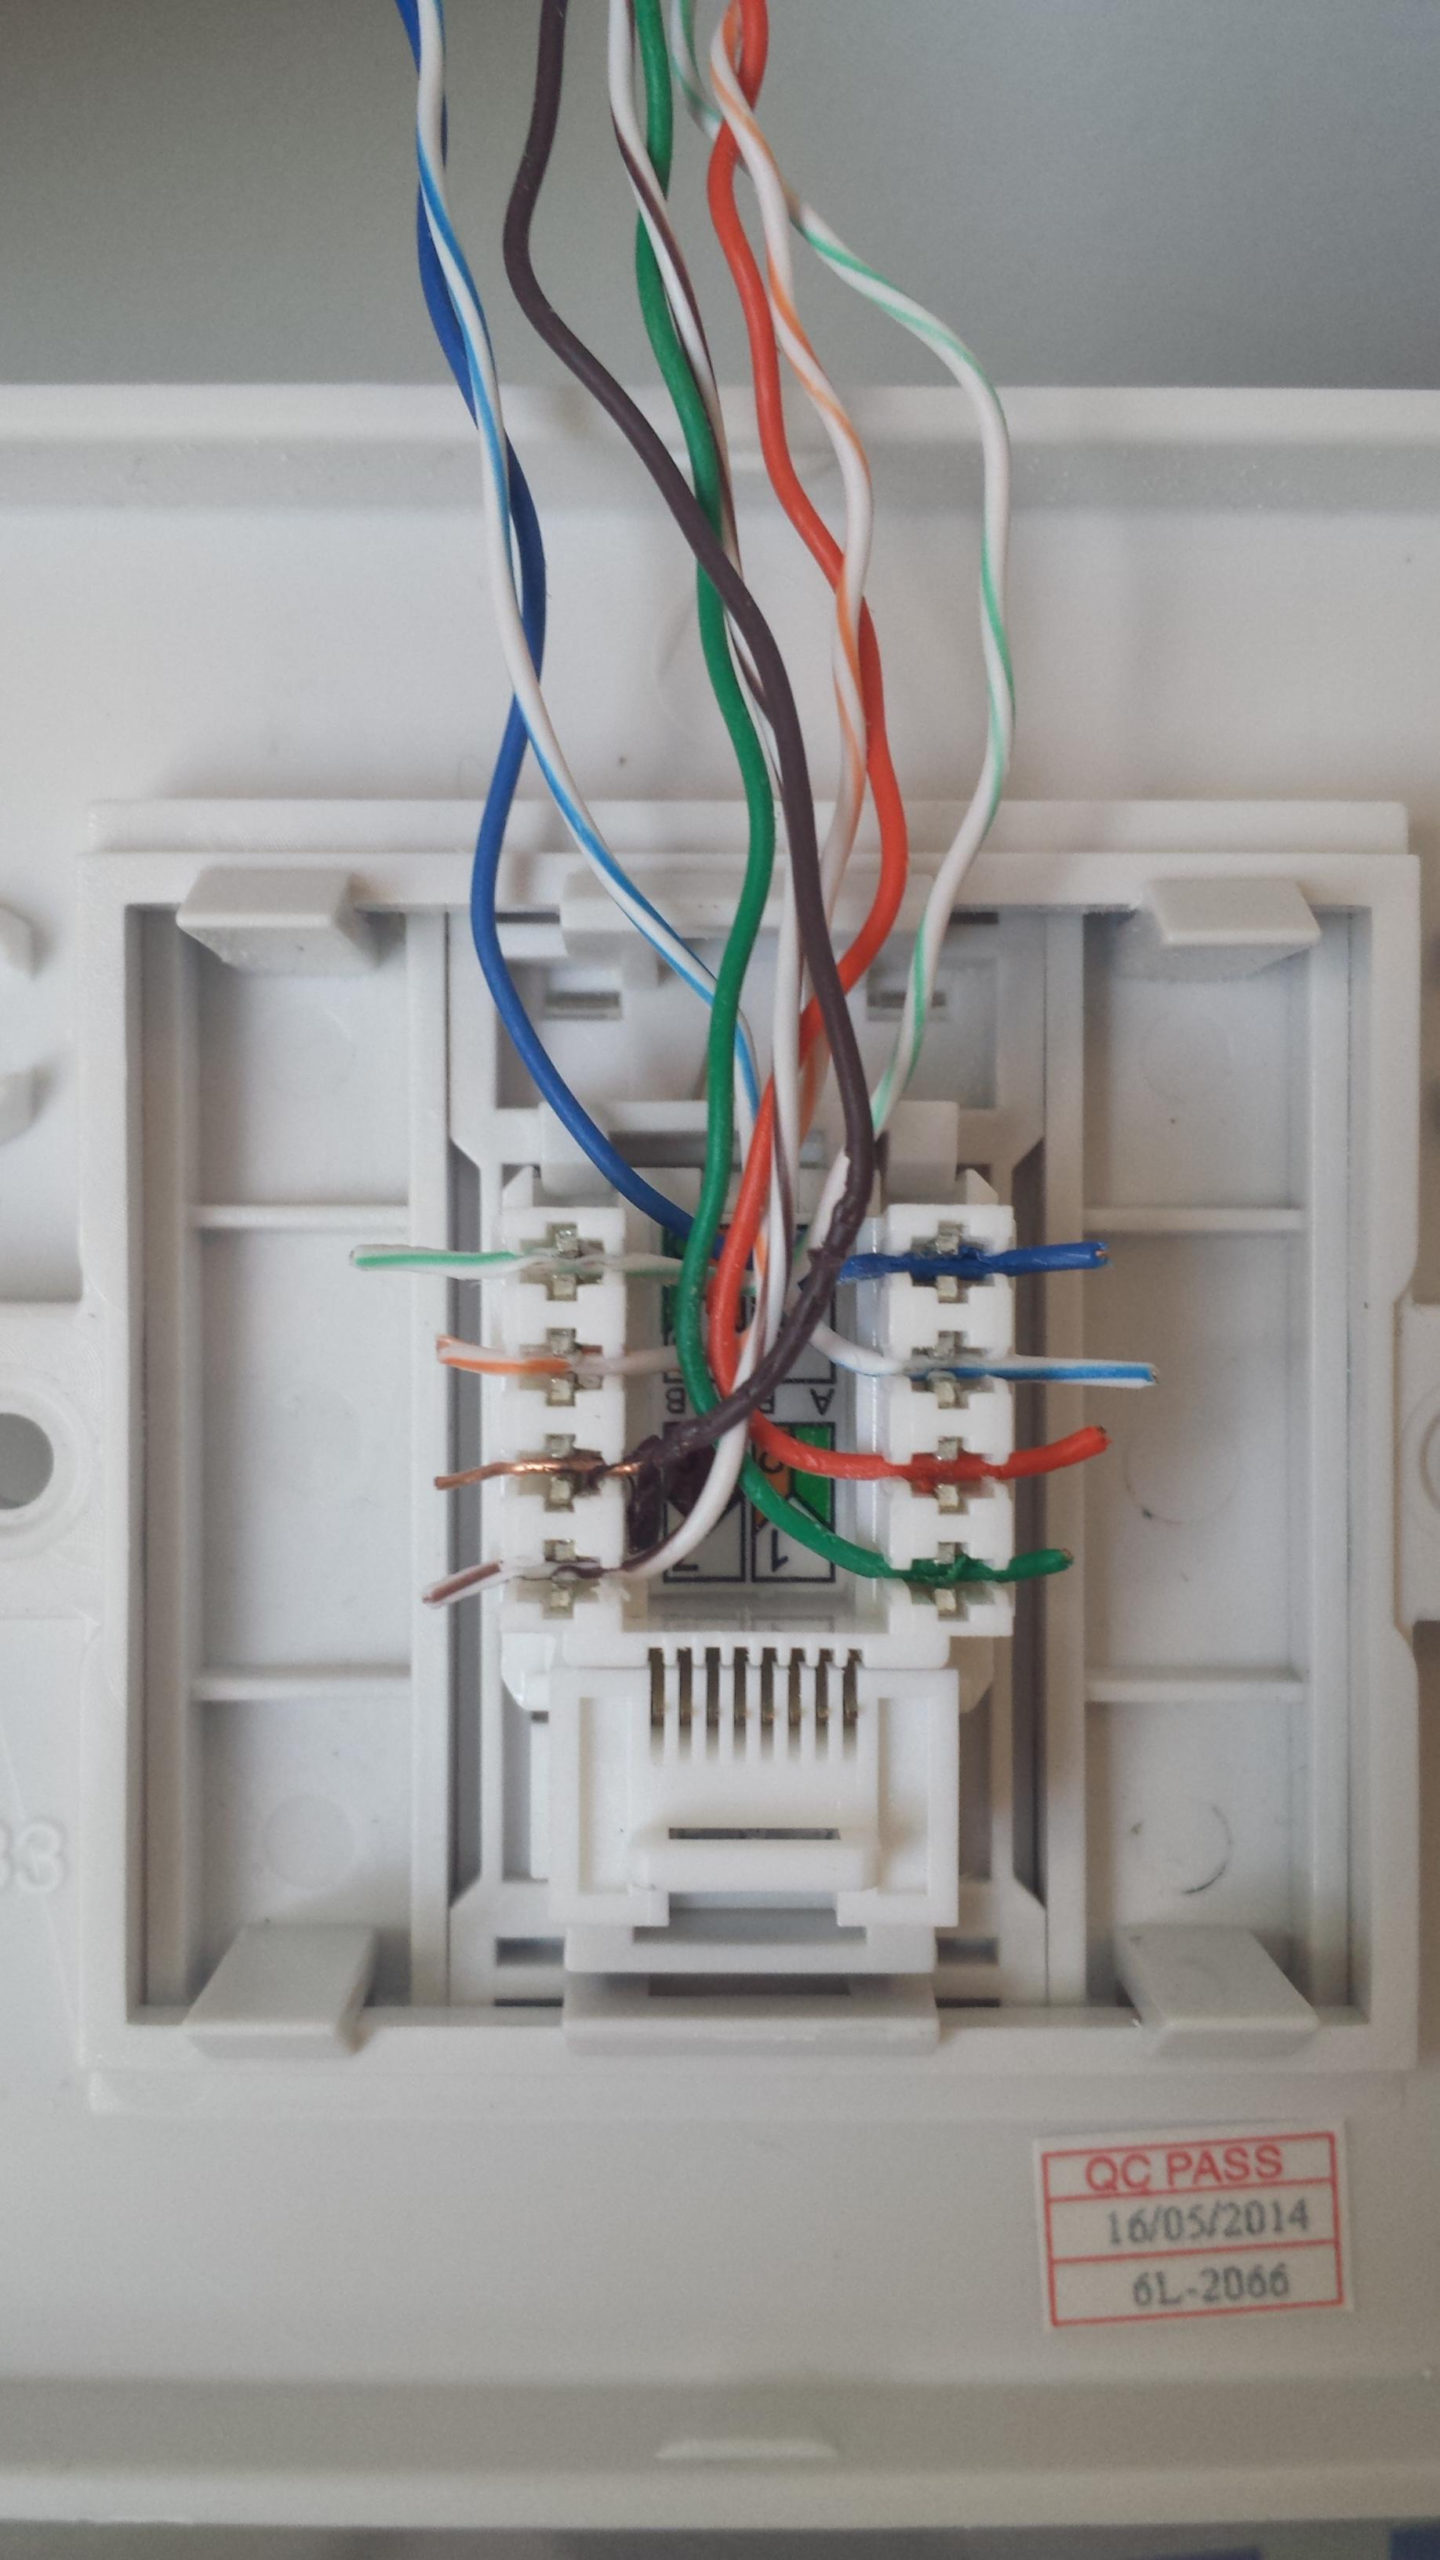 Wall Jack Wiring Diagram For Cat 5e